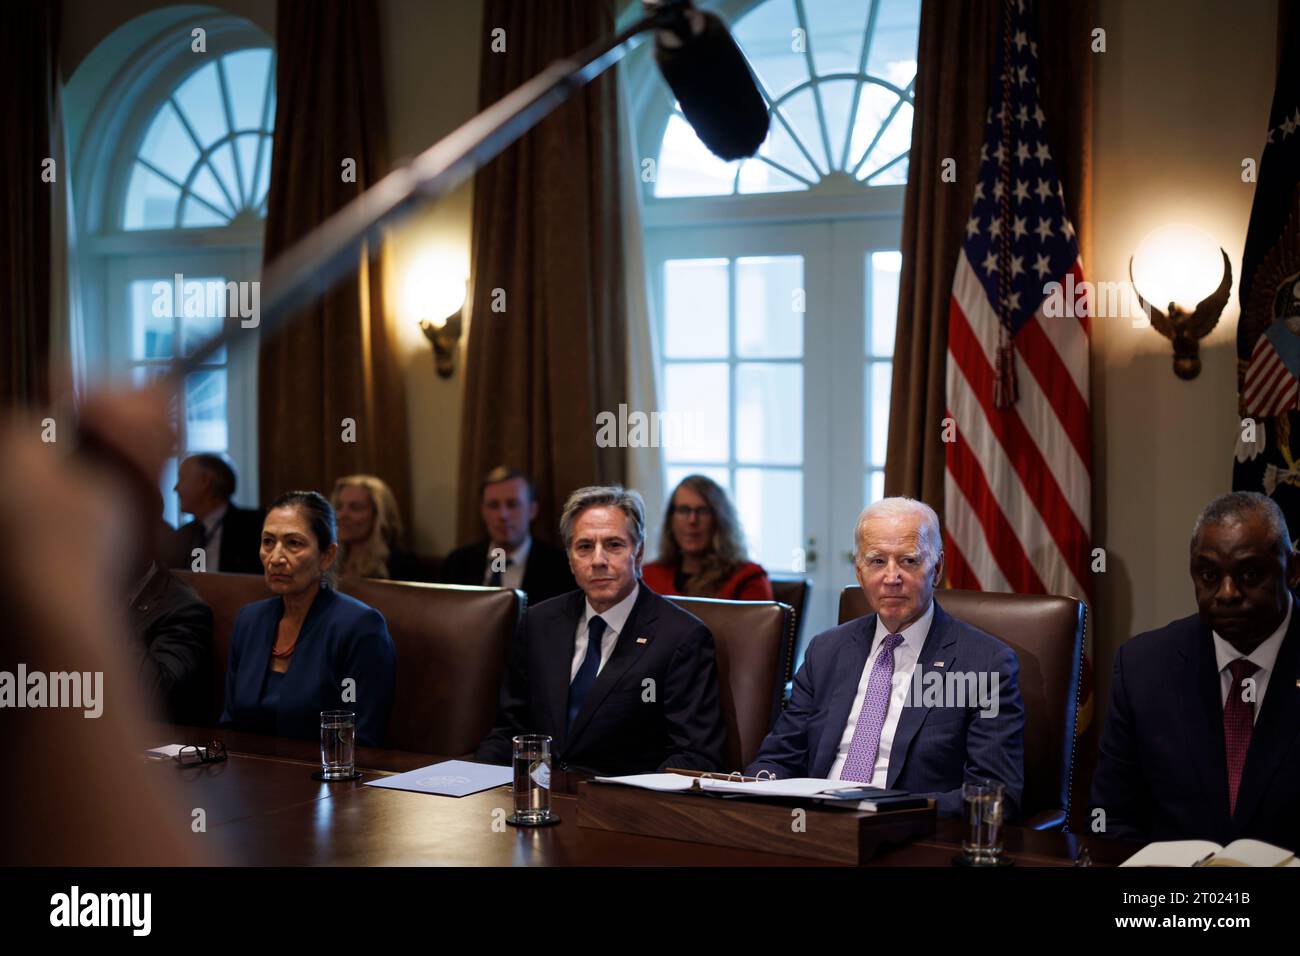 Pictured from left to right: United States Secretary of the Interior Debra Haaland, US Secretary of State Antony Blinken, US President Joe Biden, and US Secretary of Defense Lloyd J. Austin III during a cabinet meeting at the White House in Washington, DC, US, on Monday, October 2, 2023. On Saturday, Congress passed a bipartisan measure that would keep the US government funded until Nov. 17 with $16 billion in disaster funding, however the lack of $6 billion in Ukraine aid is a blow to Biden. Credit: Ting Shen / Pool via CNP Stock Photo